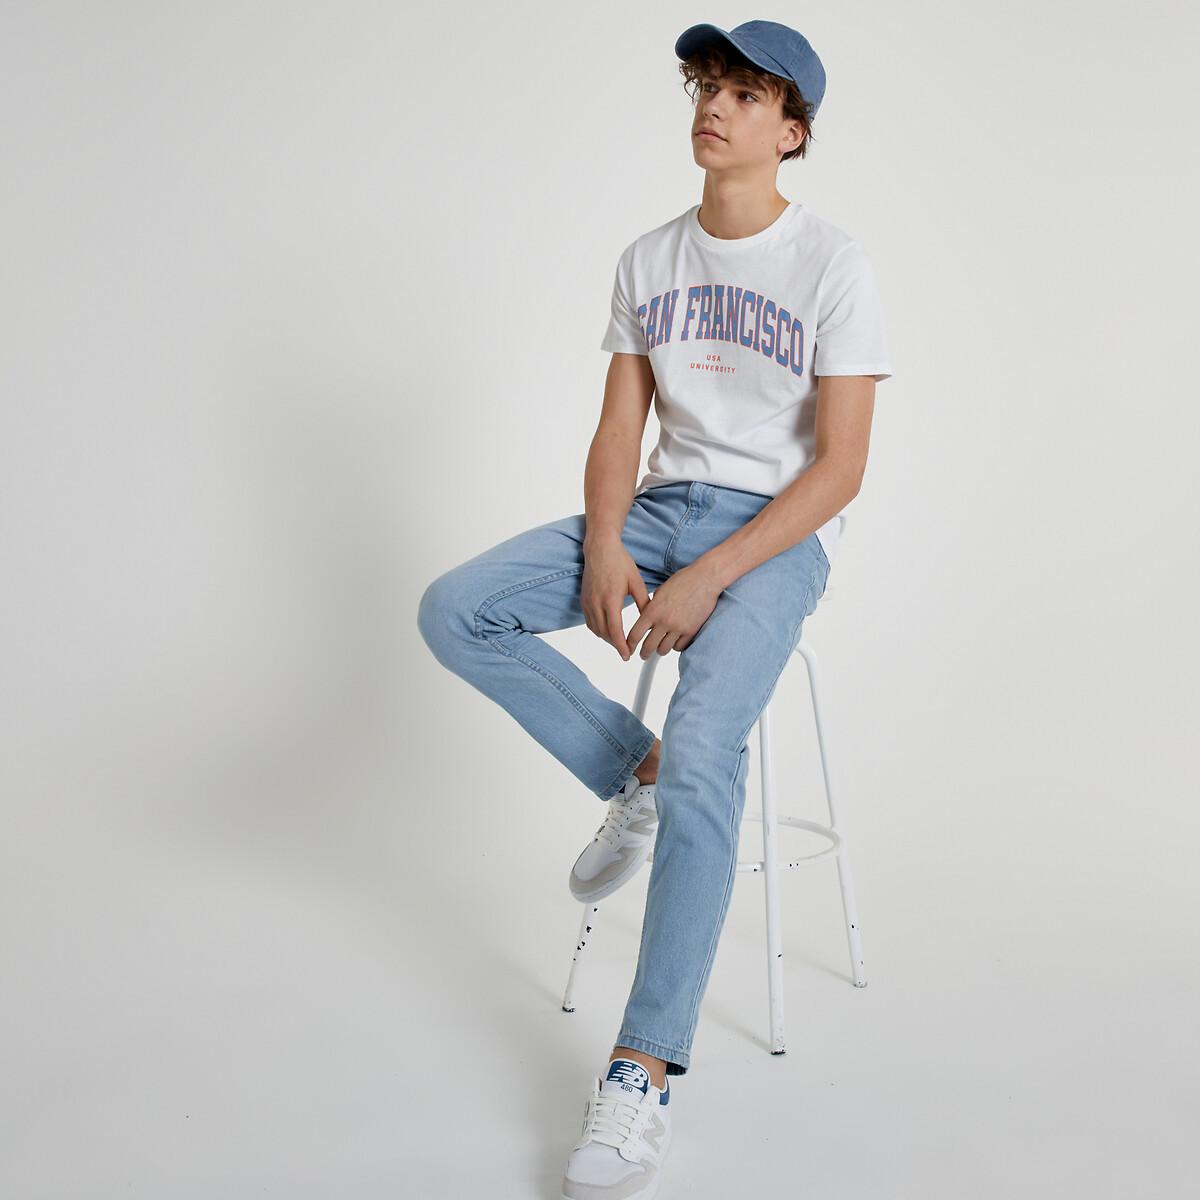 La Redoute Collections  Gerade Jeans 